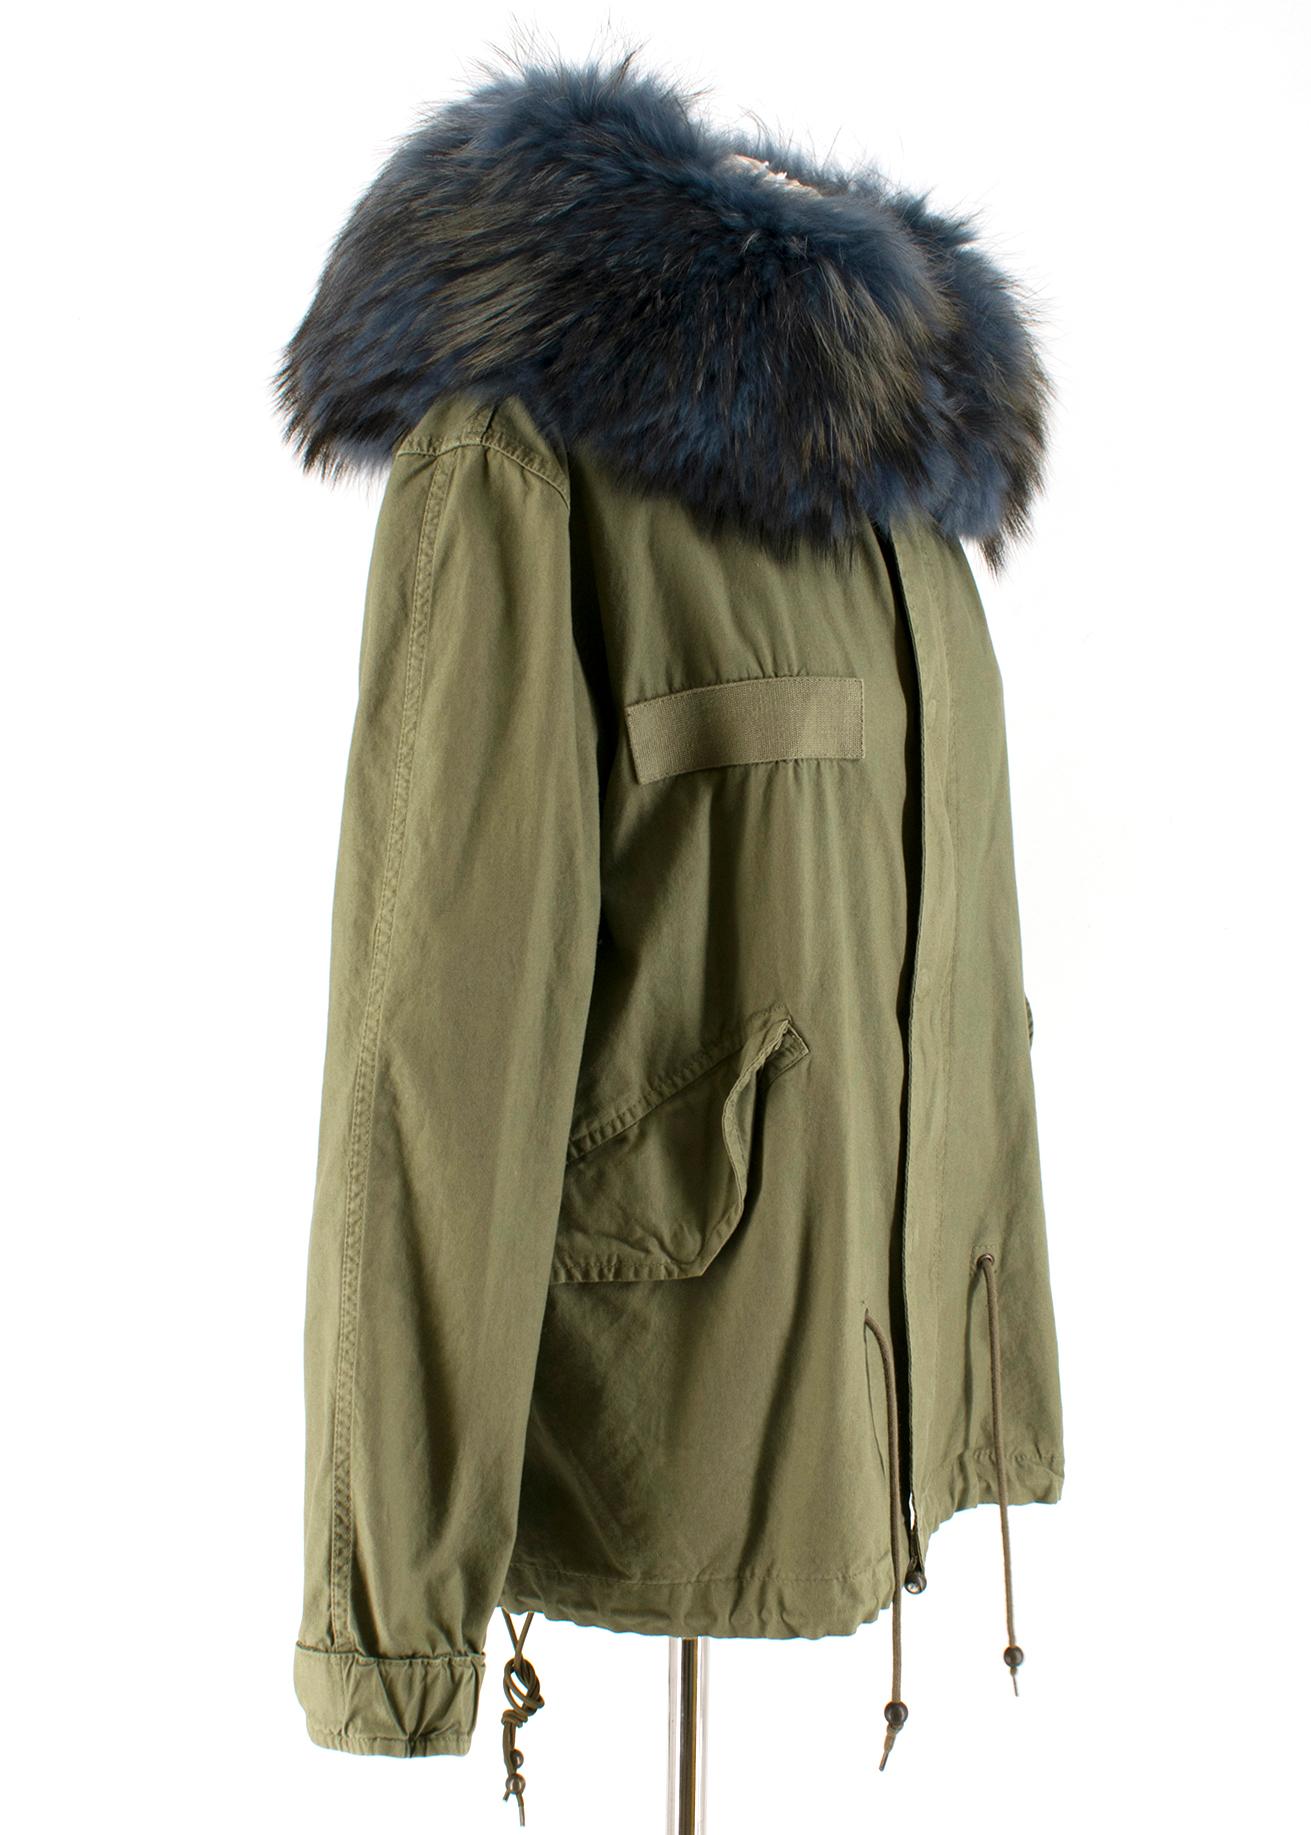 Mr & Mrs Italy Green Parka Coat with Blue Fur Hood

Cotton parka coat with soft navy blue fur hood,
Long sleeves, 
Front centre zip fastening,
Features snap button,
Button up cuffs,
Fur trim hood is removable, 
Front flap